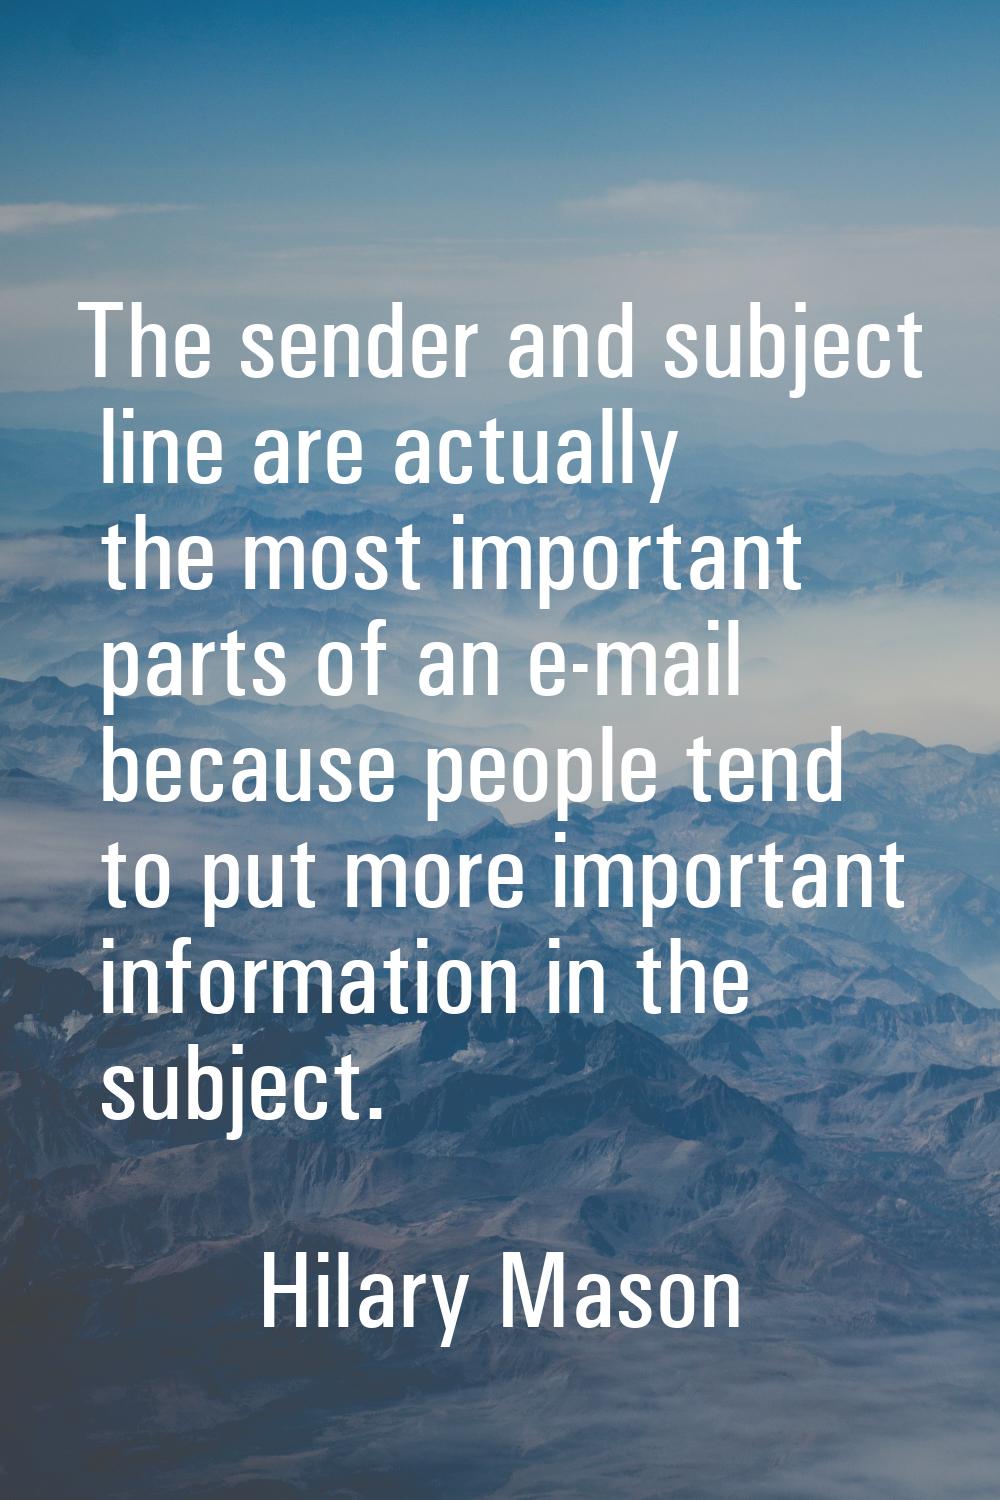 The sender and subject line are actually the most important parts of an e-mail because people tend 